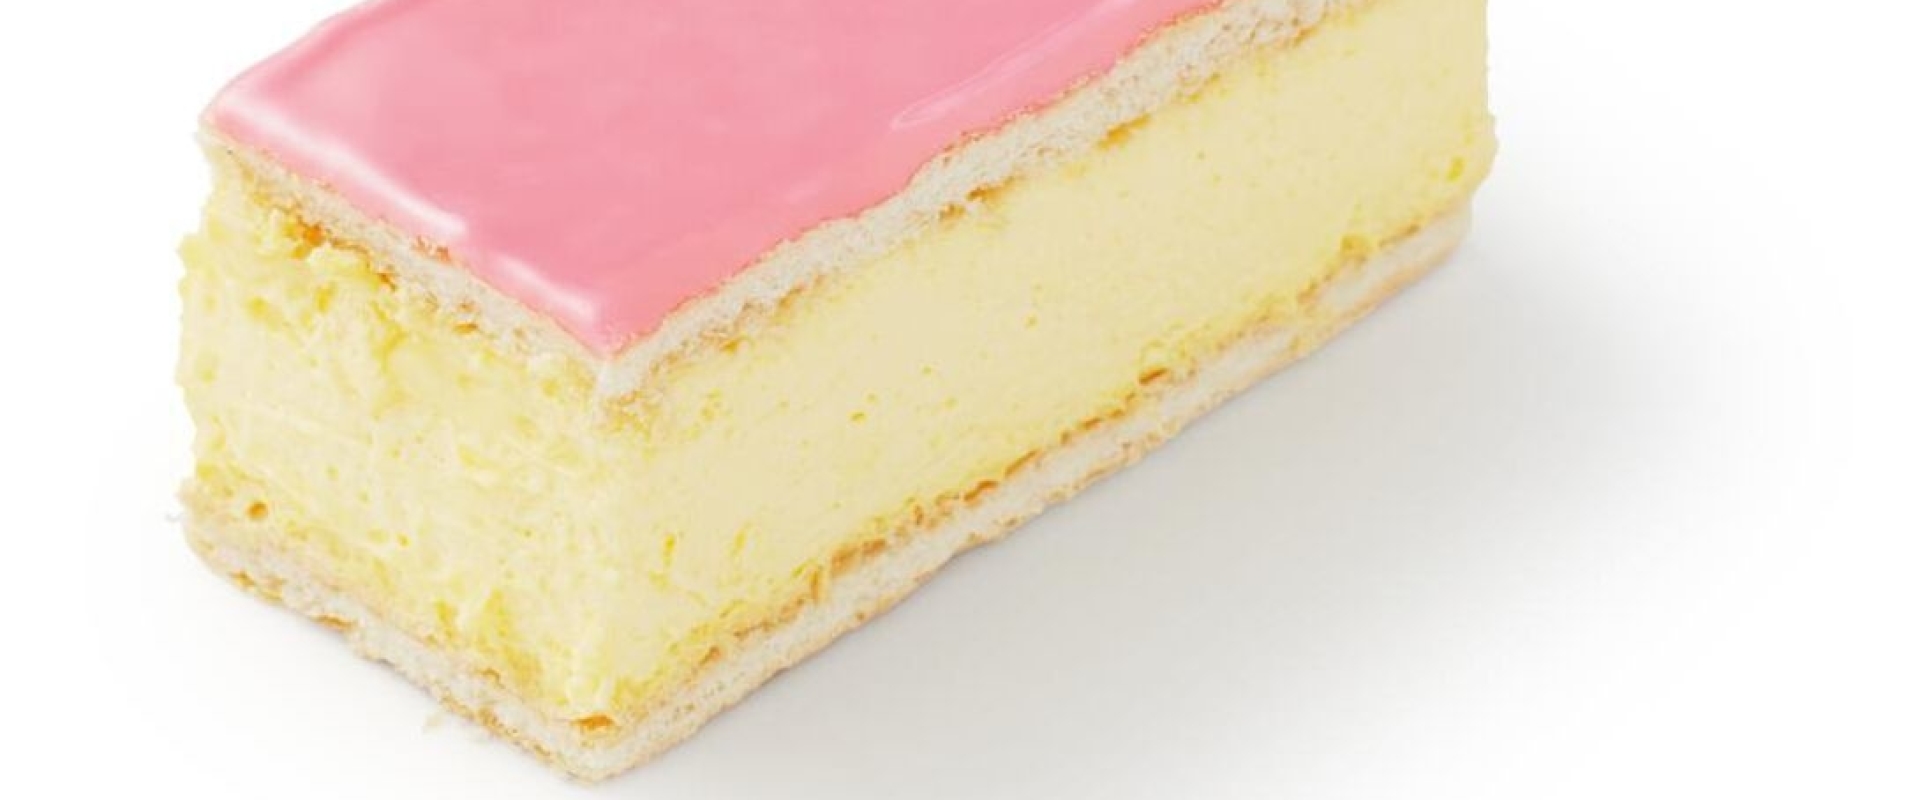 The Dutch Tompouce pastry is pink or orange